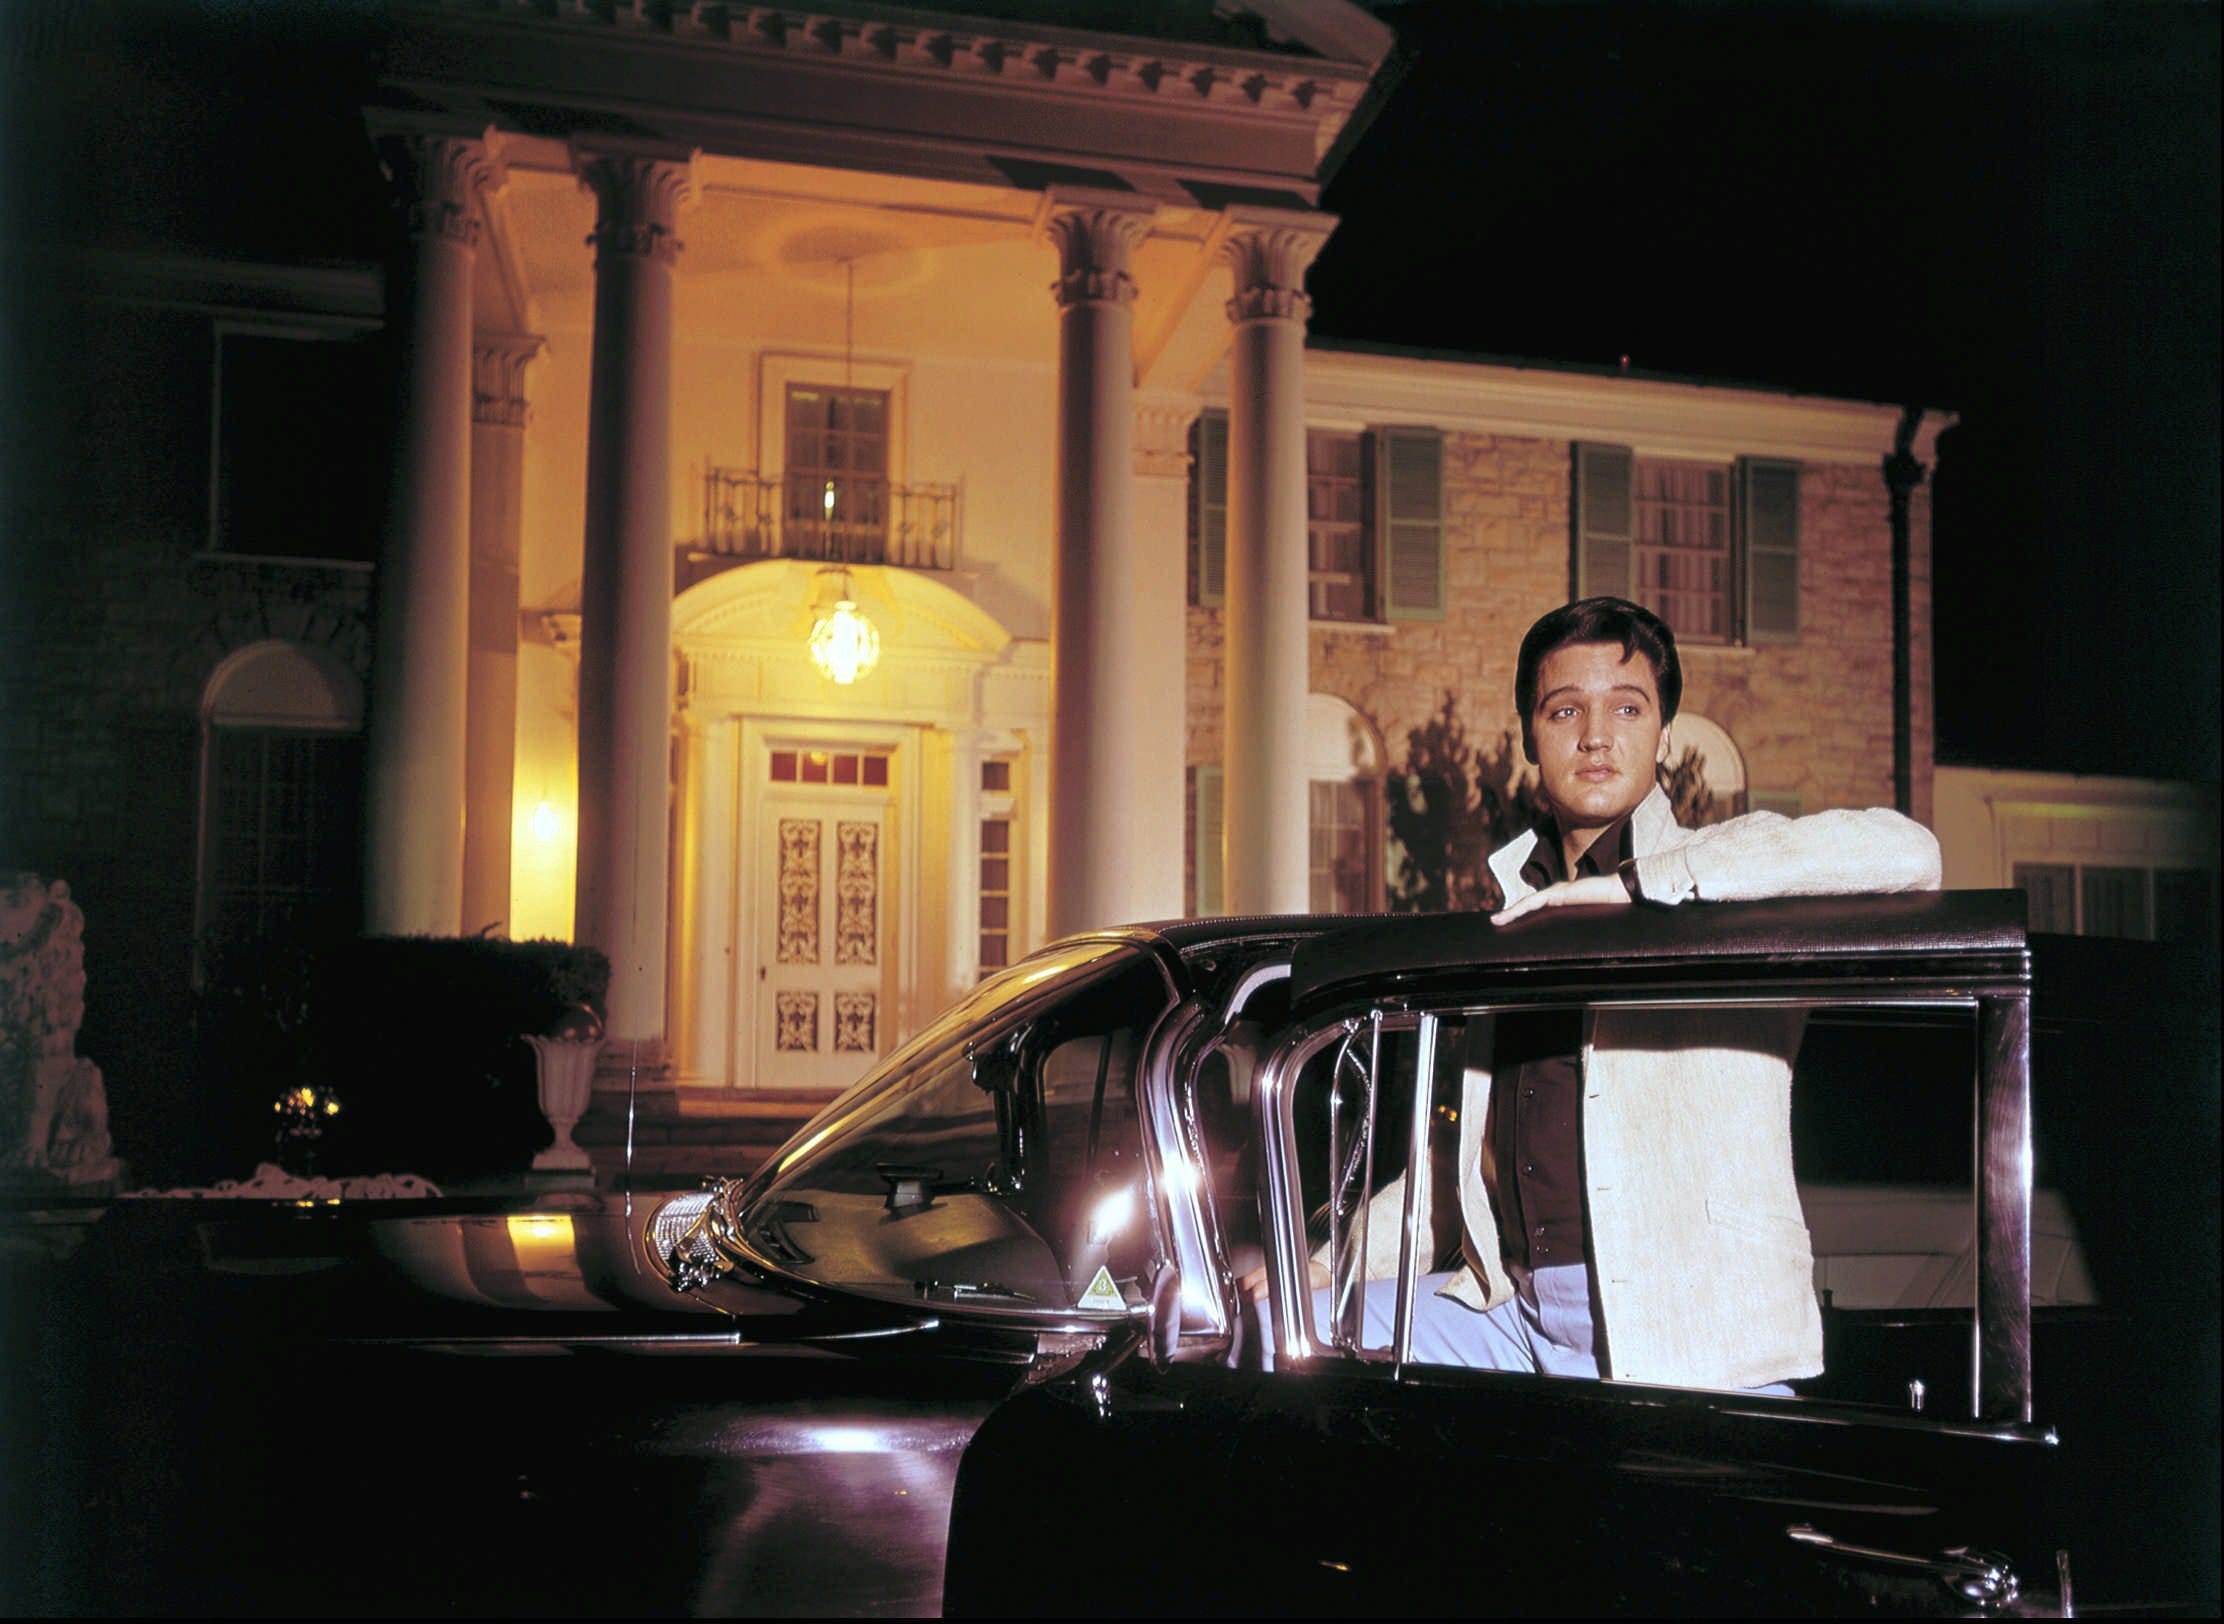 Elvis Presley posed with one of his cars outside Graceland in this photograph published March 7, 1965. Elvis complained of the long sessions with photographers making movie publicity stills: "I try to cut the time down to three or four hours, but sometimes you have to pose for six or eight. A man only has so many different smiles, and I don't have many."